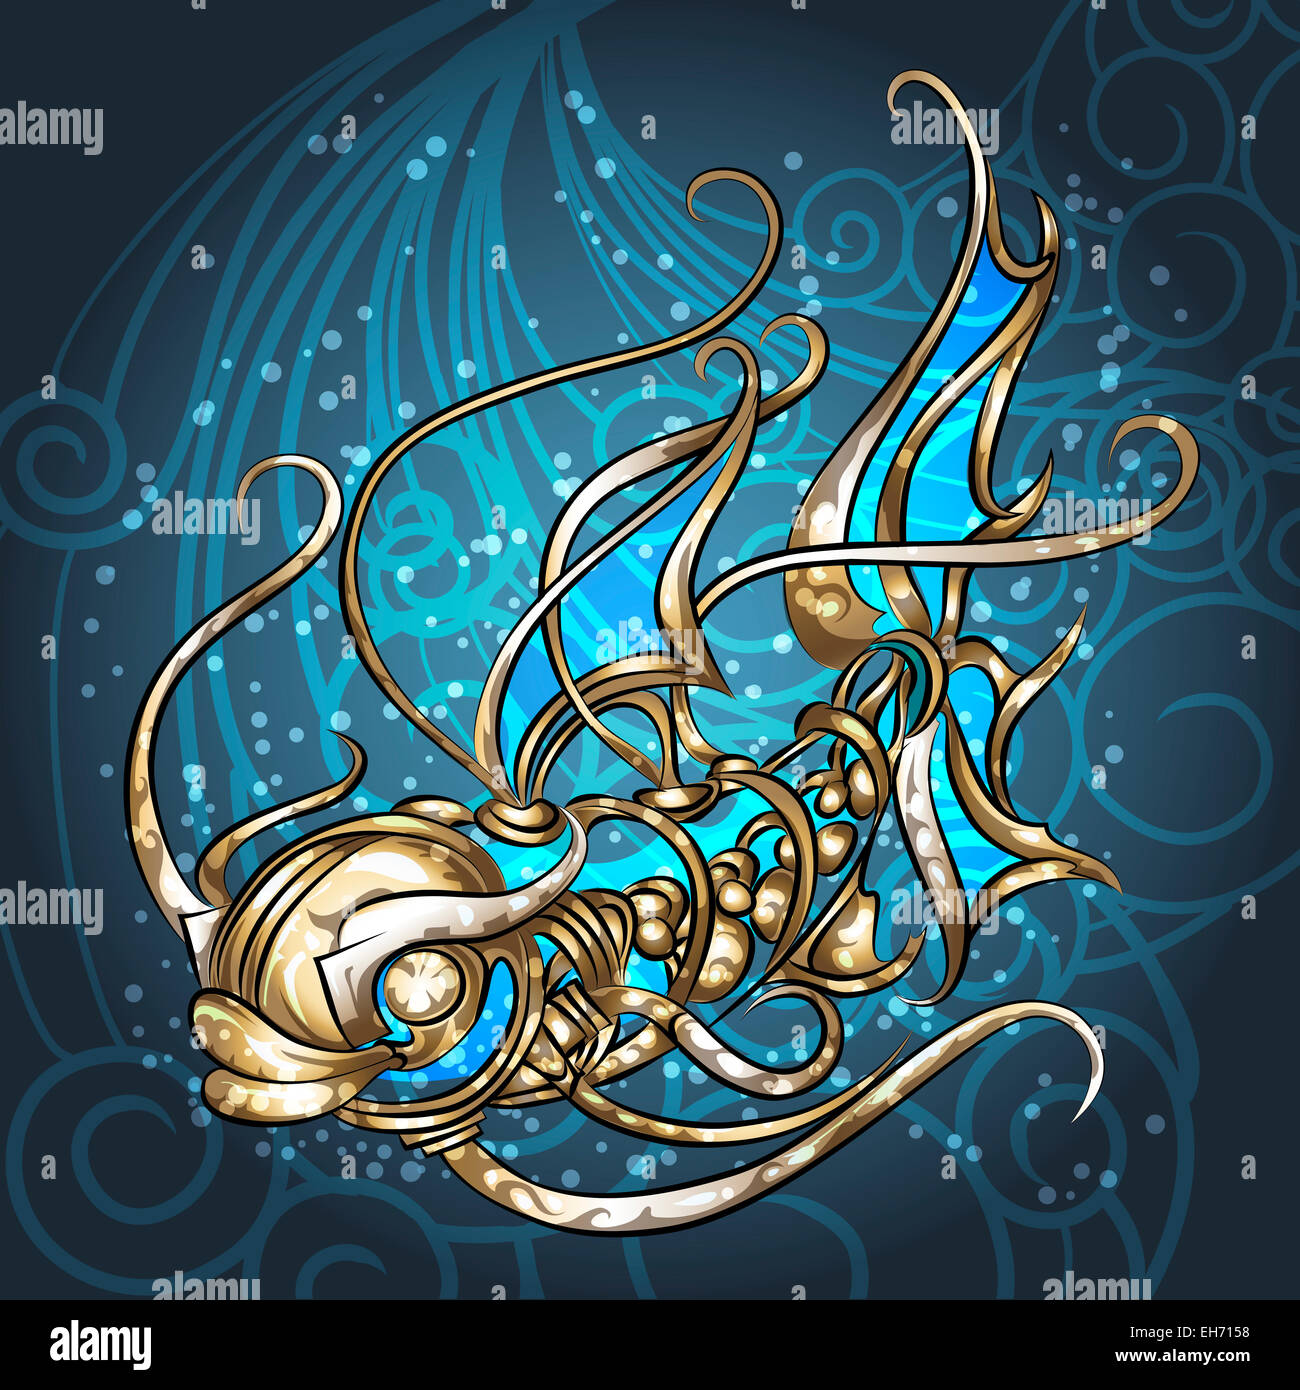 Illustration with mechanical golden fish in the cloud of bubbles drawn in steam punk style Stock Photo